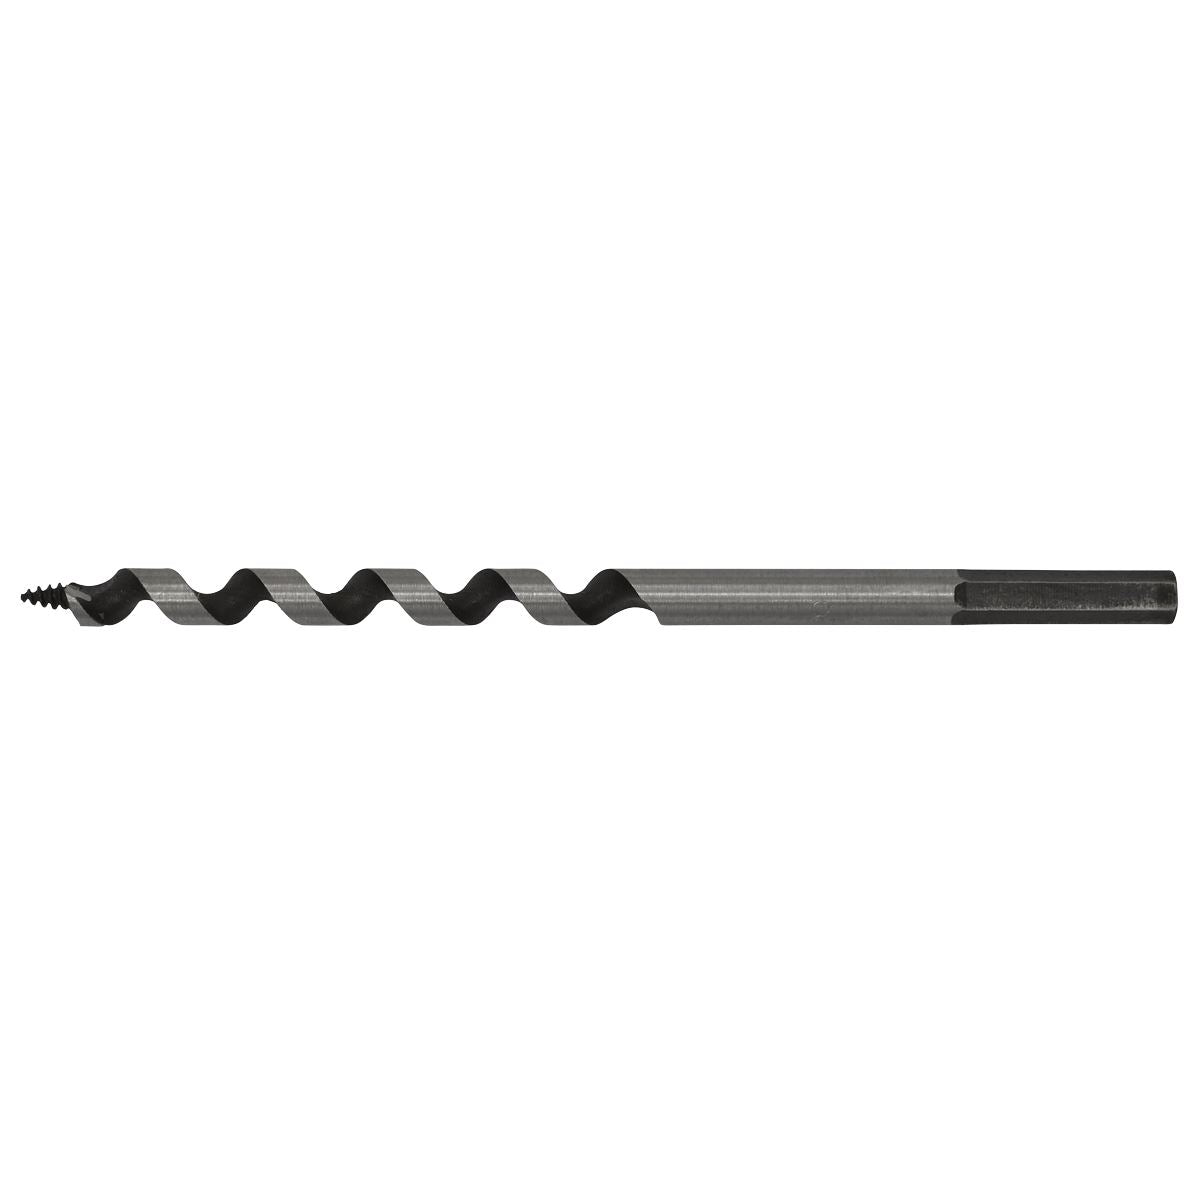 Worksafe by Sealey Auger Wood Drill Bit 8mm x 155mm